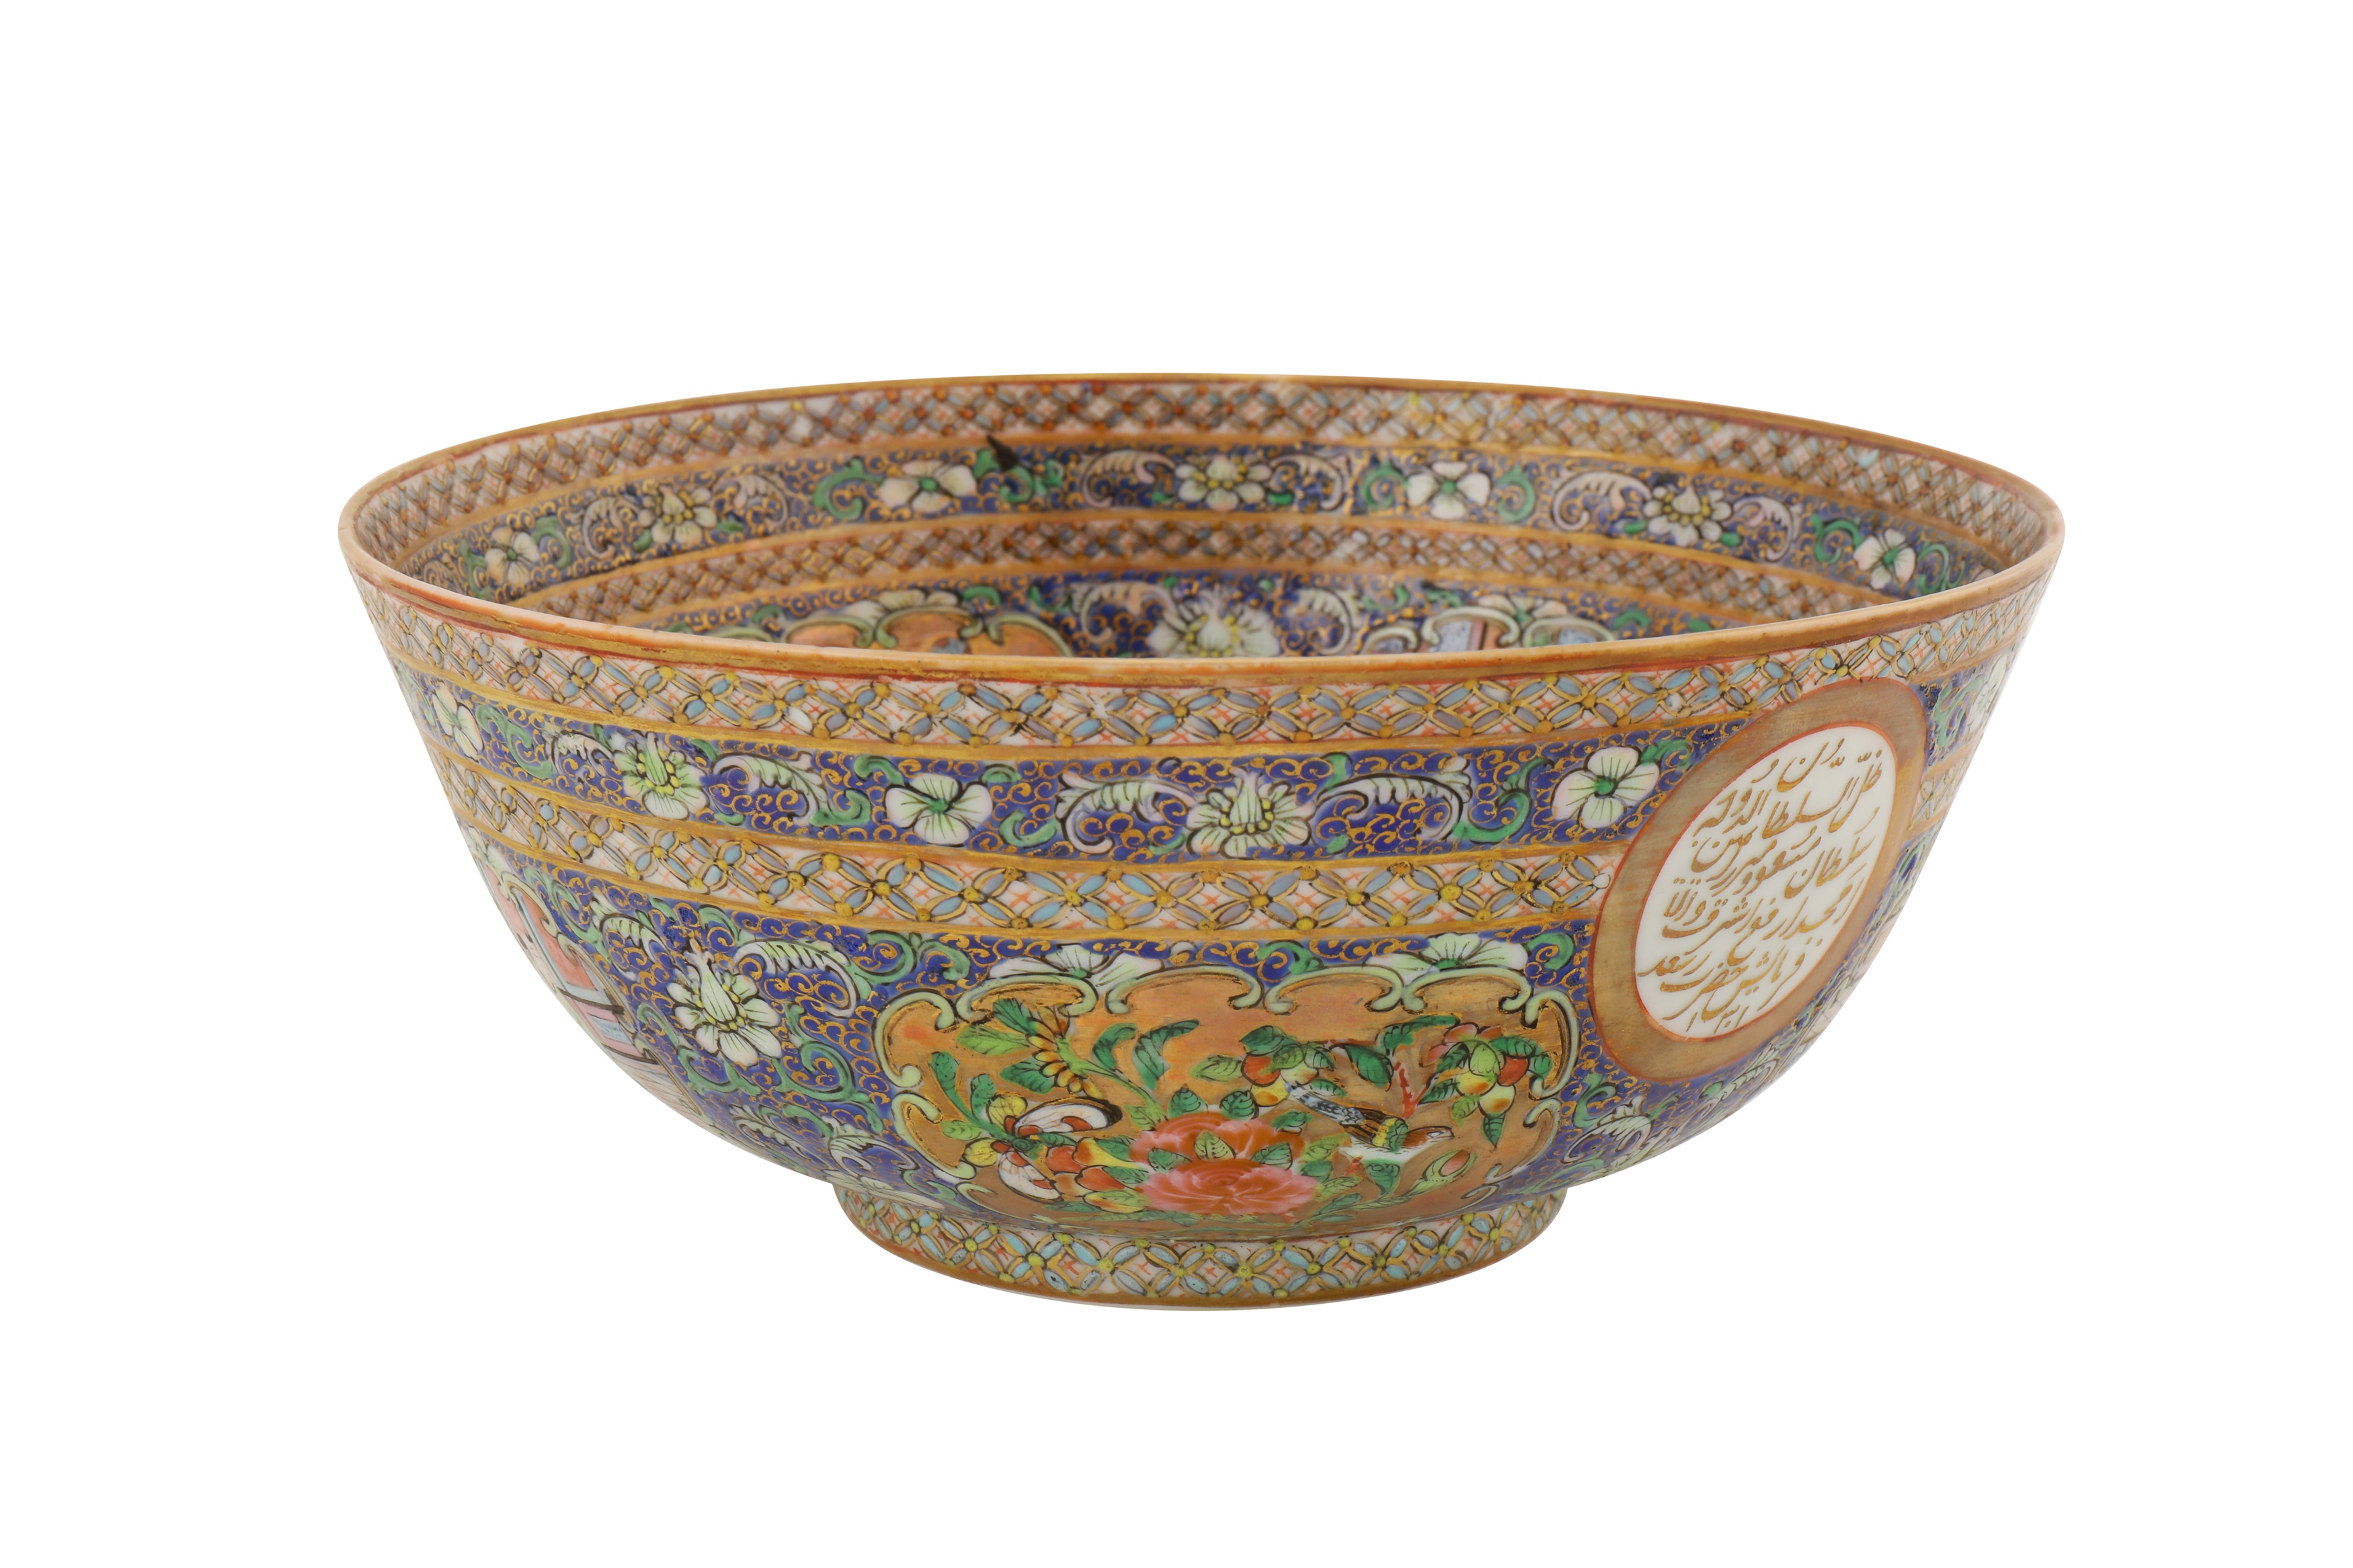 A MEDIUM-SIZED BOWL AND DISH AND SMALLER BOWL FROM THE ZILL AL-SULTAN CANTON PORCELAIN SERVICE - Image 12 of 17